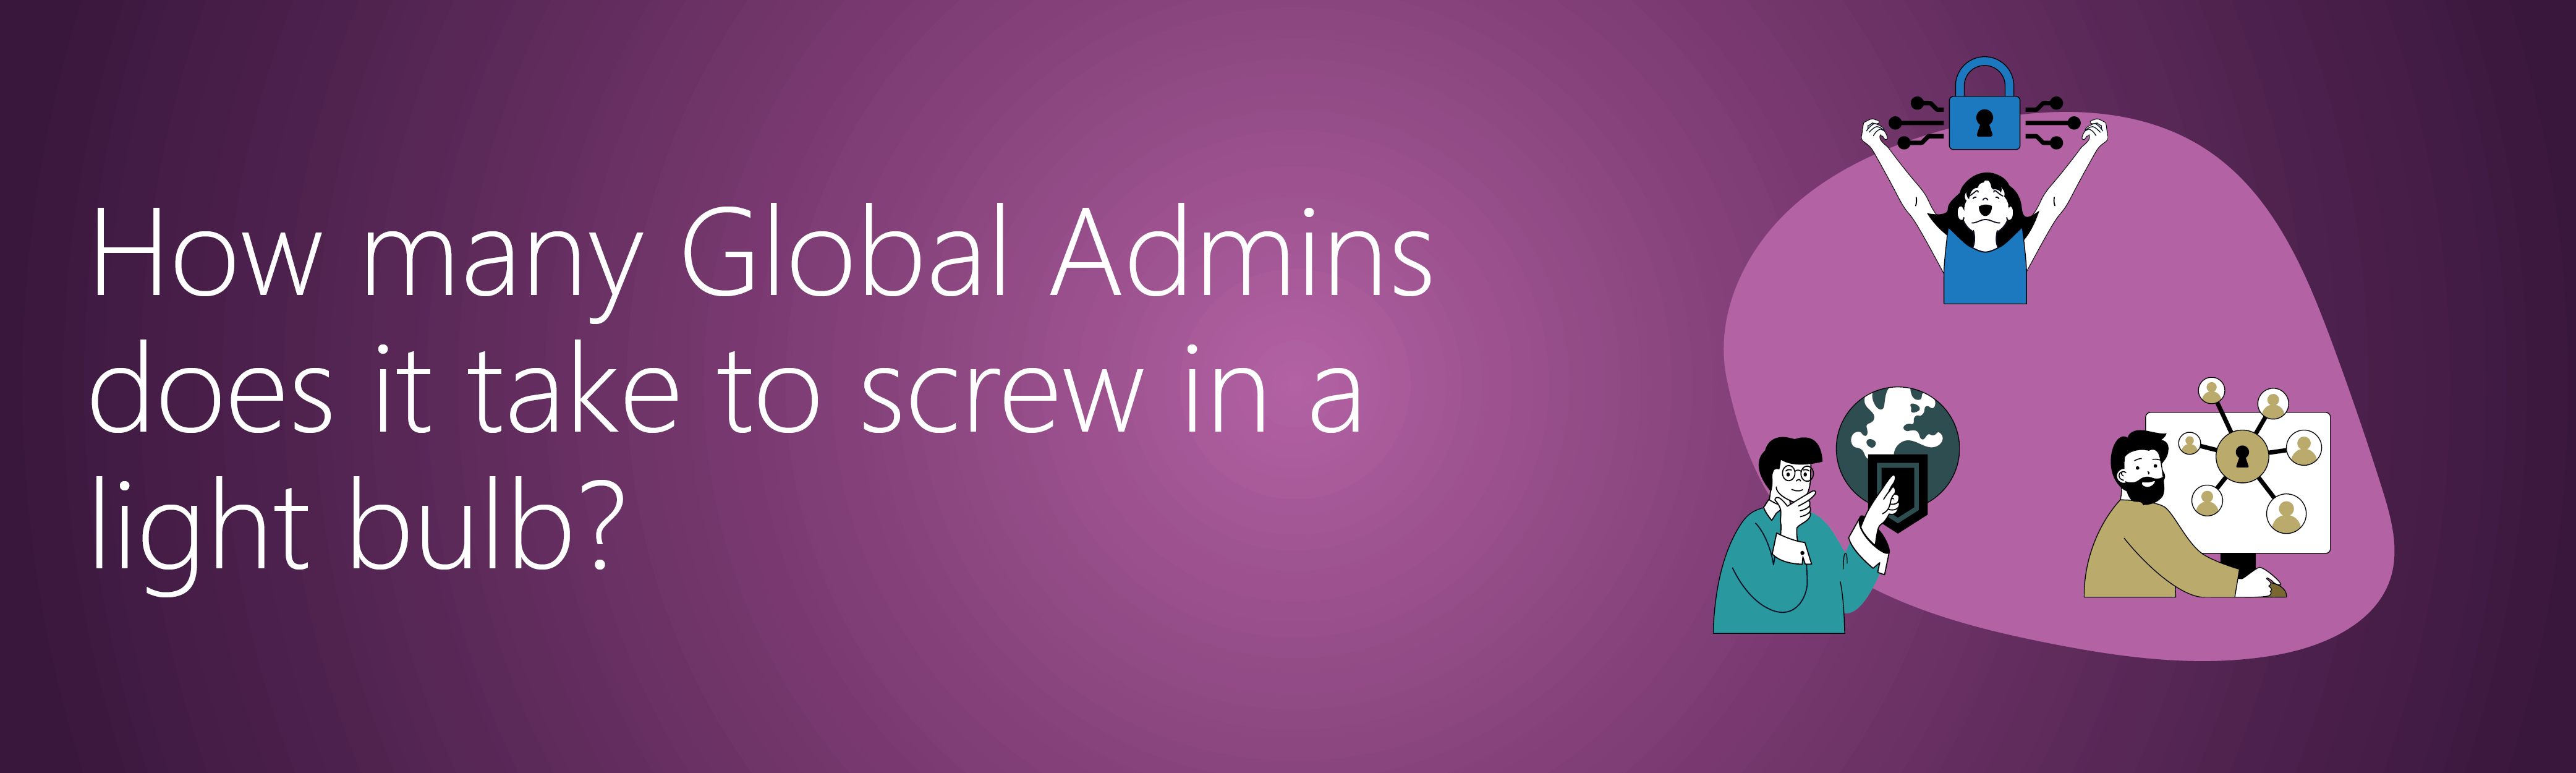 Global Admins Article Website Page Banner